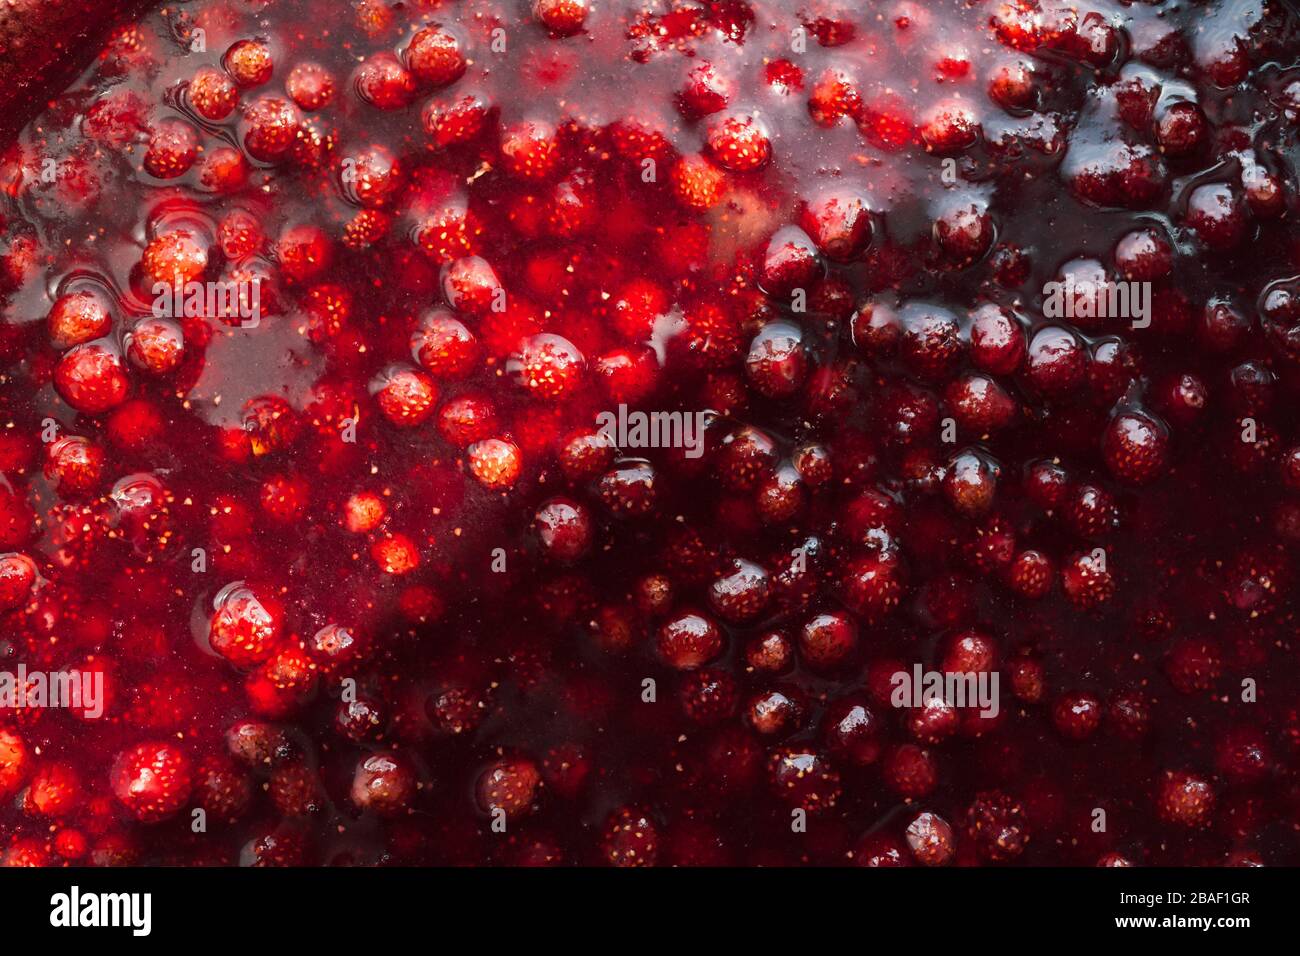 strawberry jam texture divided in half by a solar flare, food background gorisontal Stock Photo